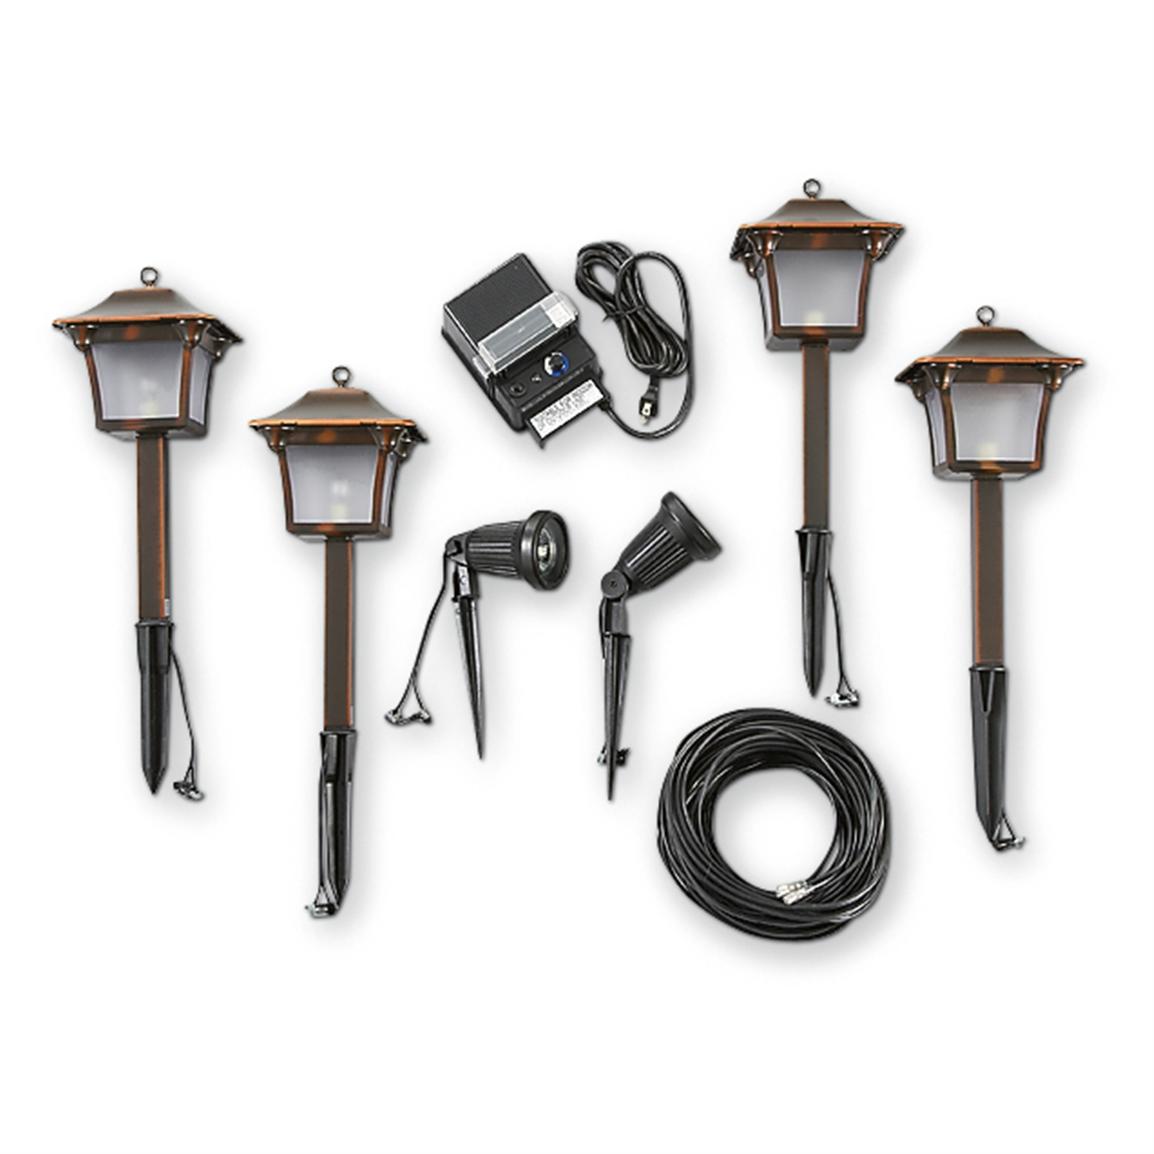 Low Voltage Landscape Lighting Free Shipping Over 35 Wayfair